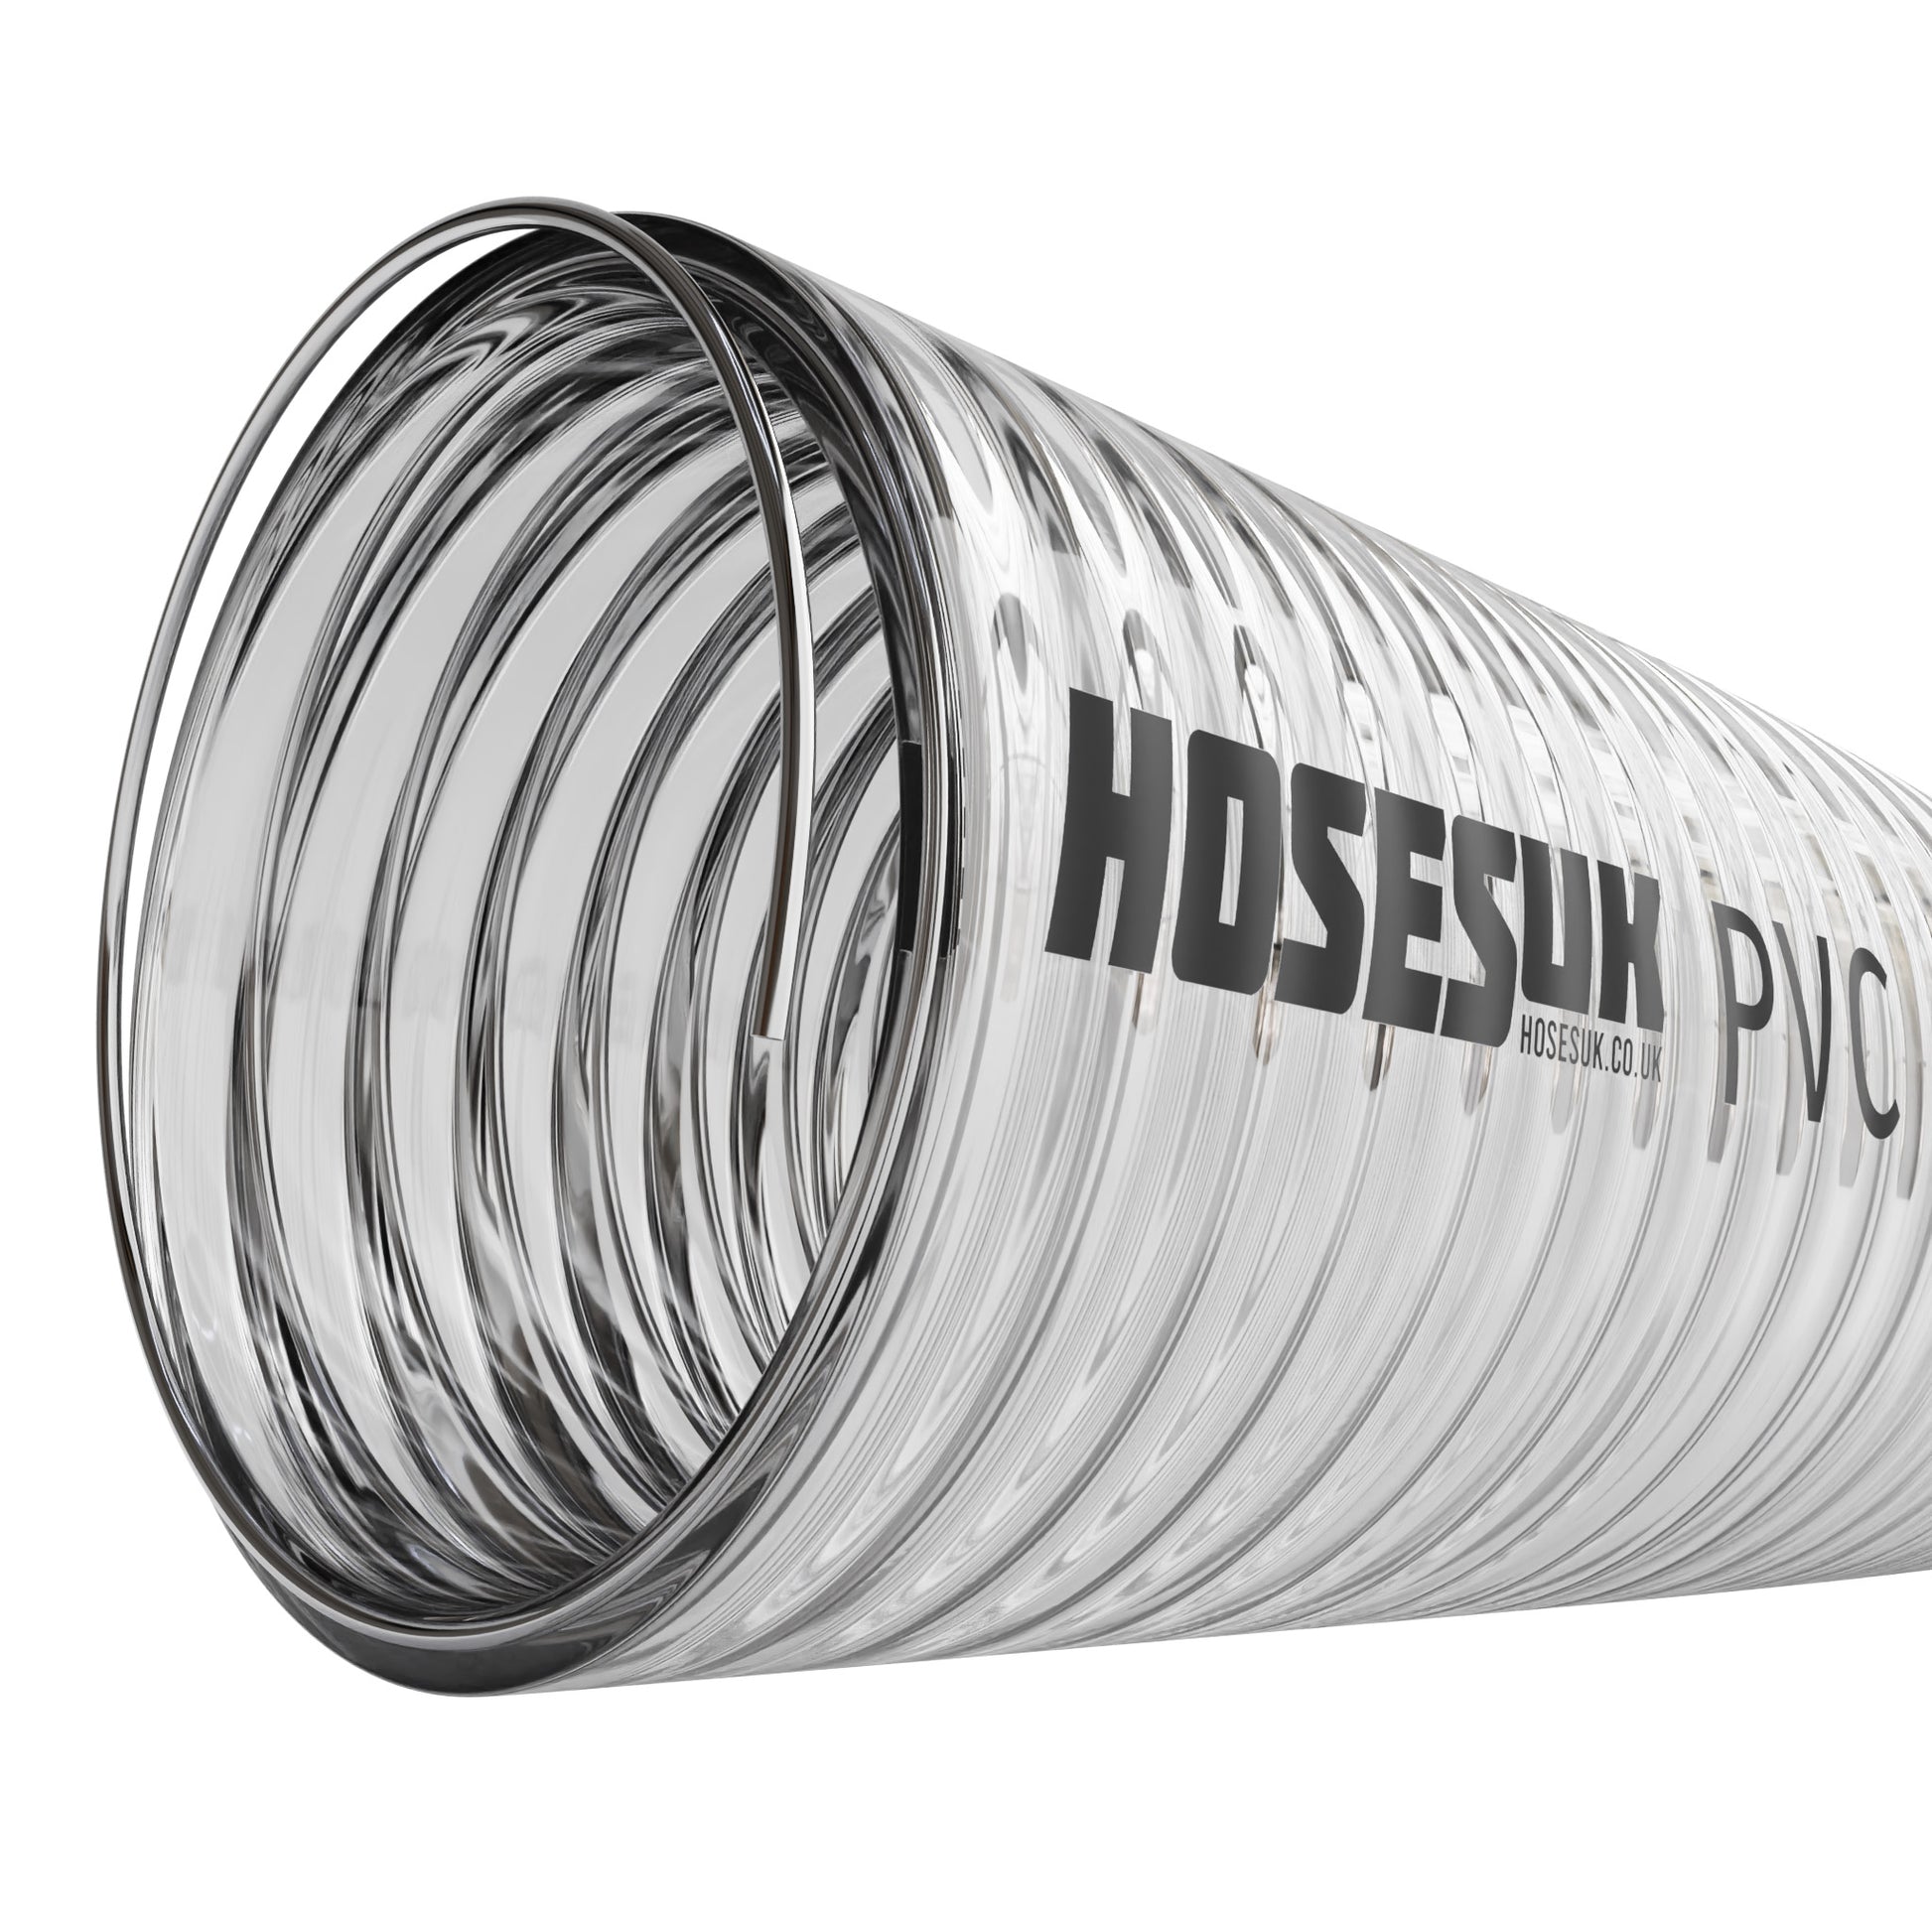 19mm ID PVC Wire Reinforced Clear Hose  Hoses UK   